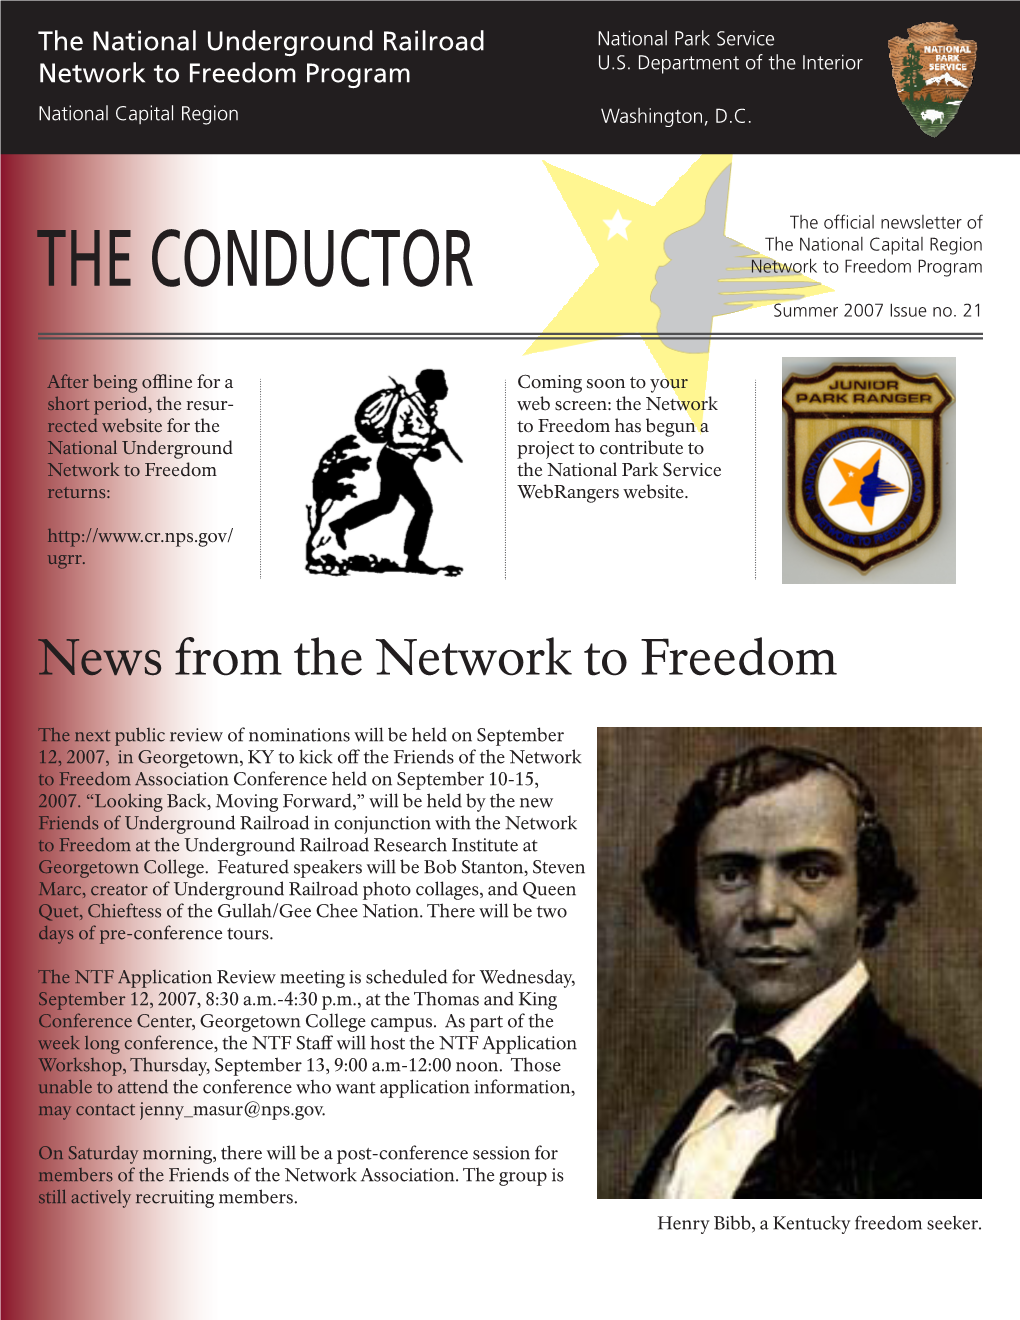 THE CONDUCTOR Network to Freedom Program Summer 2007 Issue No